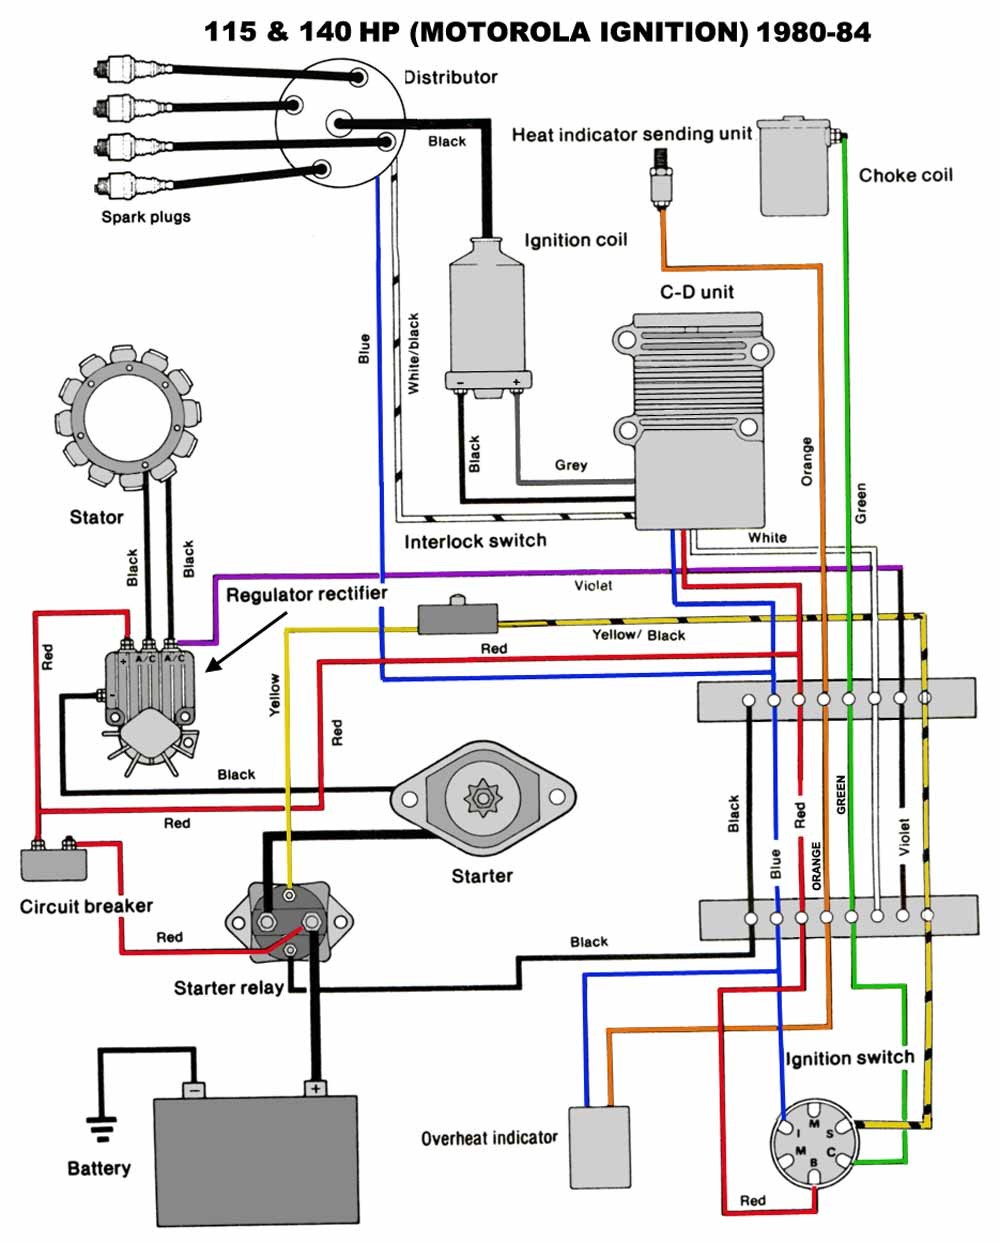 Mastertech Marine Chrysler Force Outboard Wiring Diagrams Cool Mercury Ignition Switch Diagram